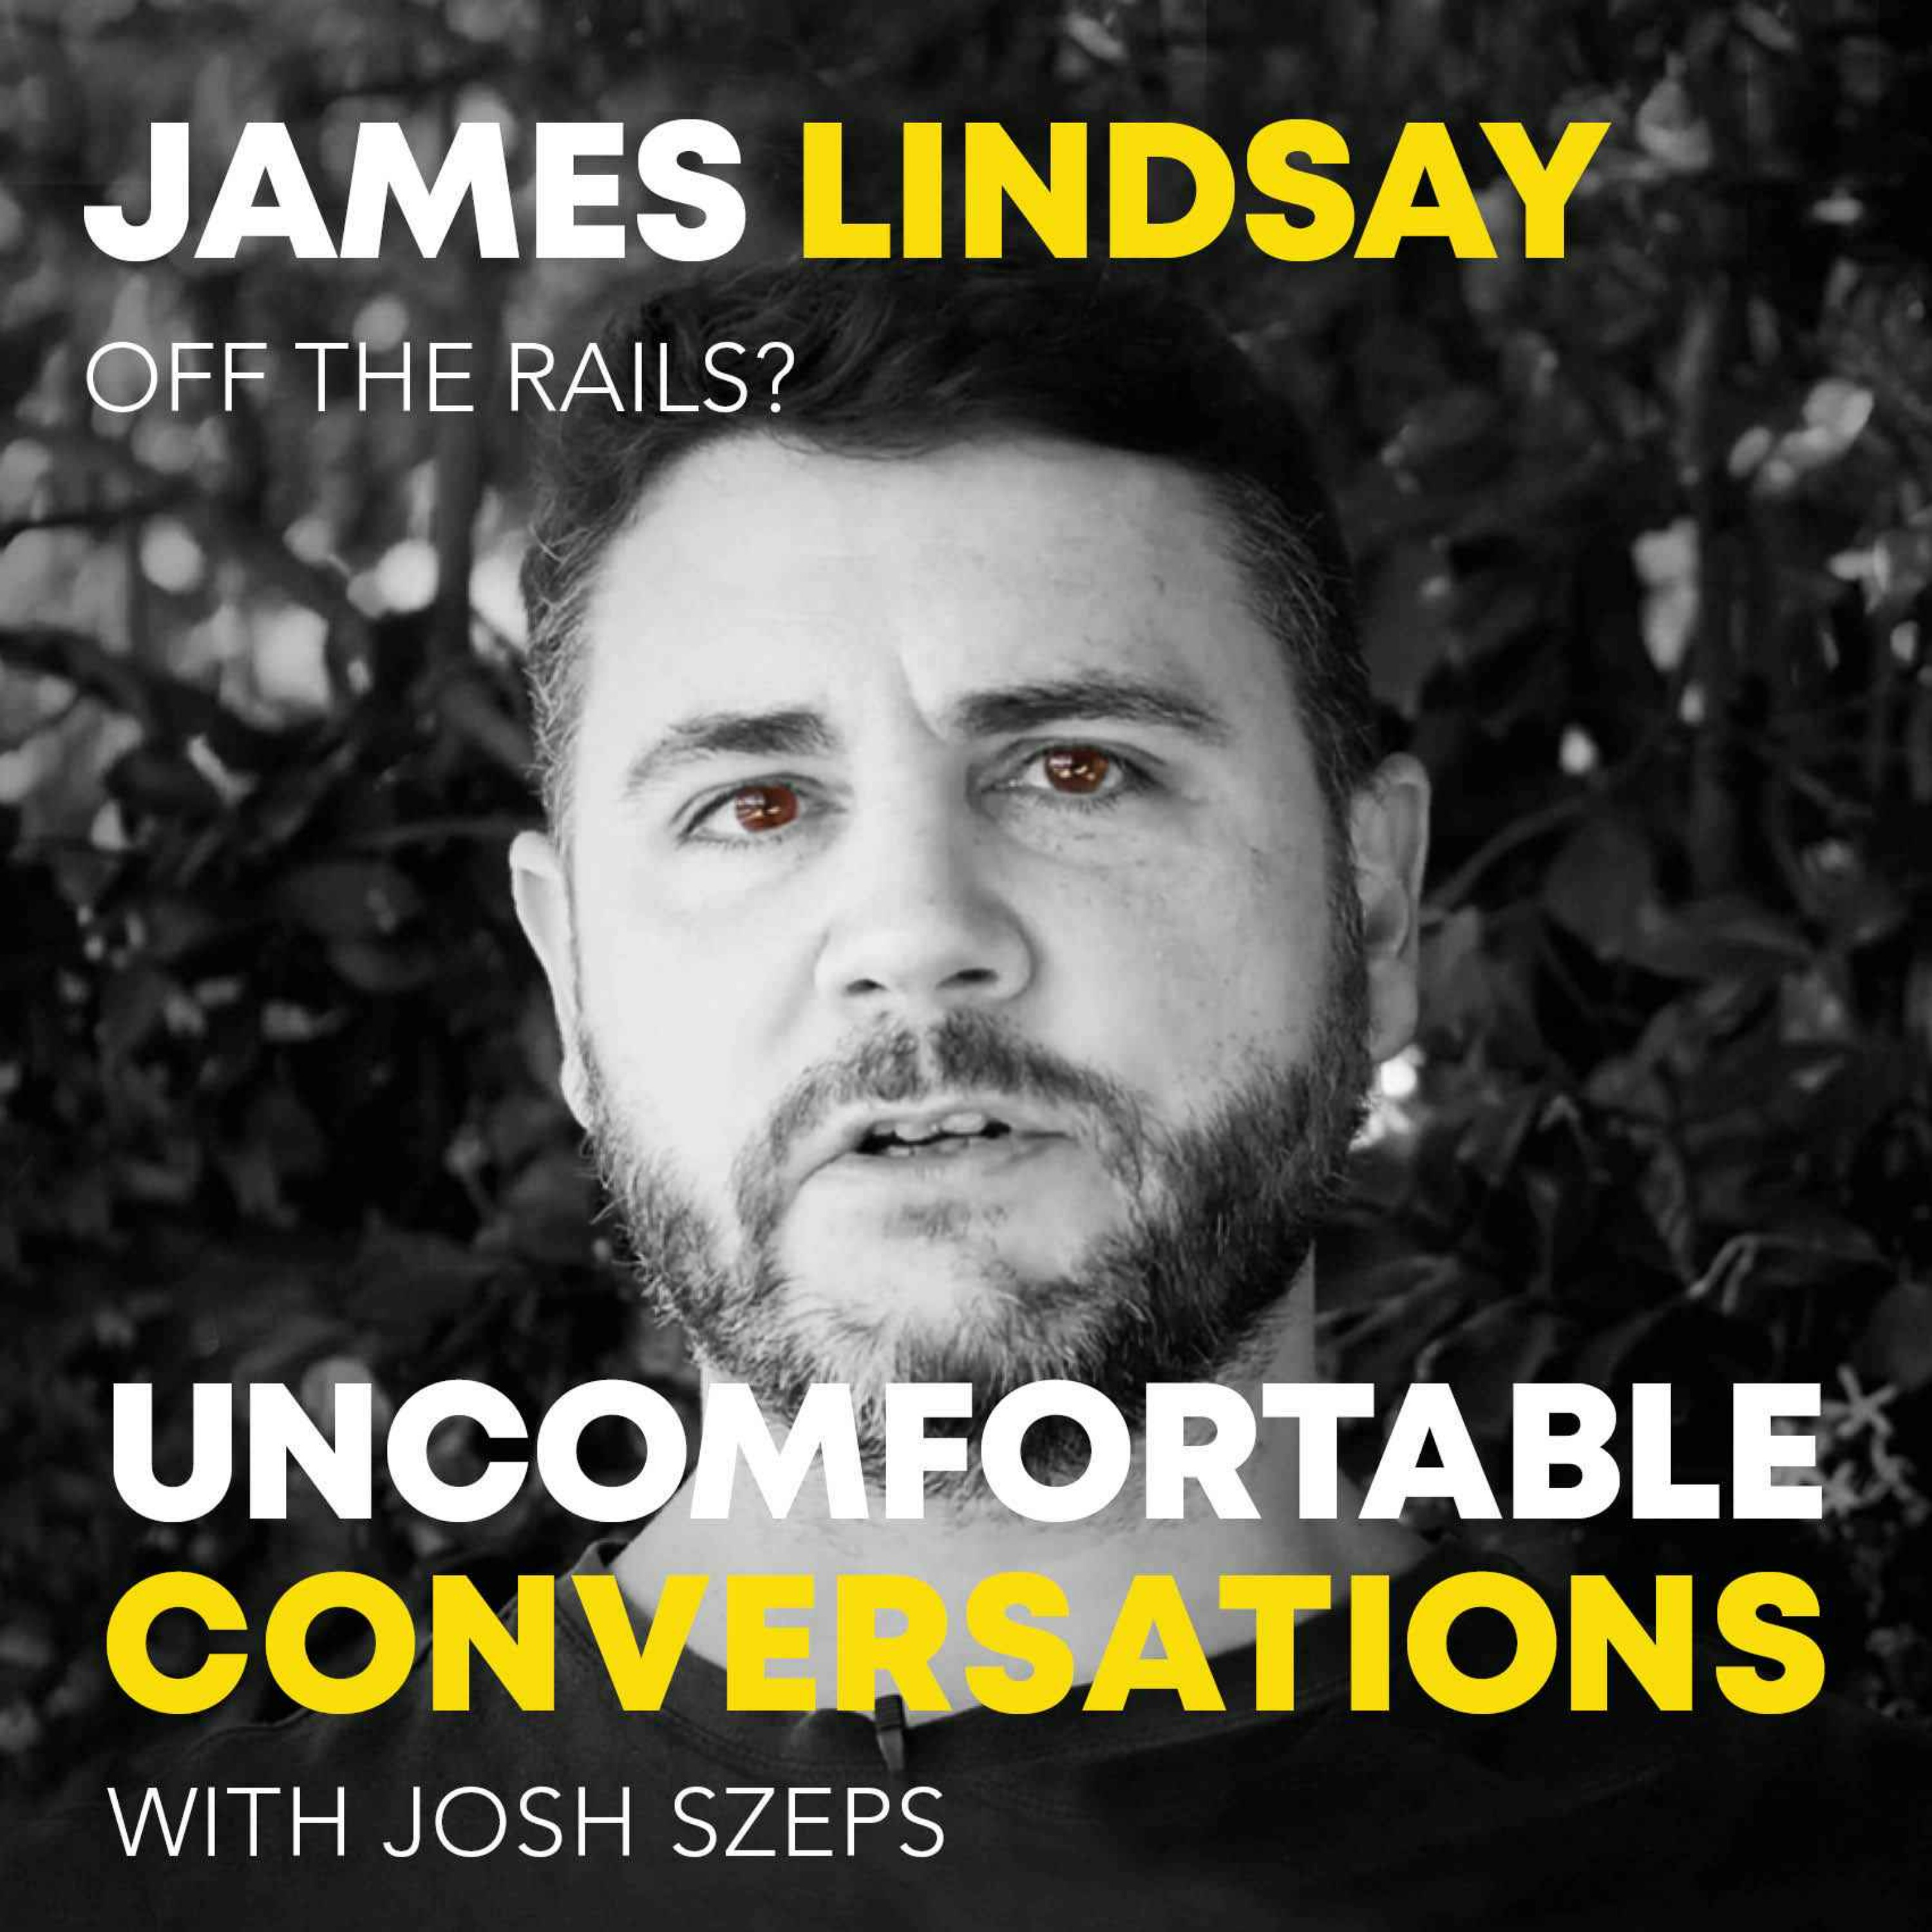 "Off The Rails?" with James Lindsay